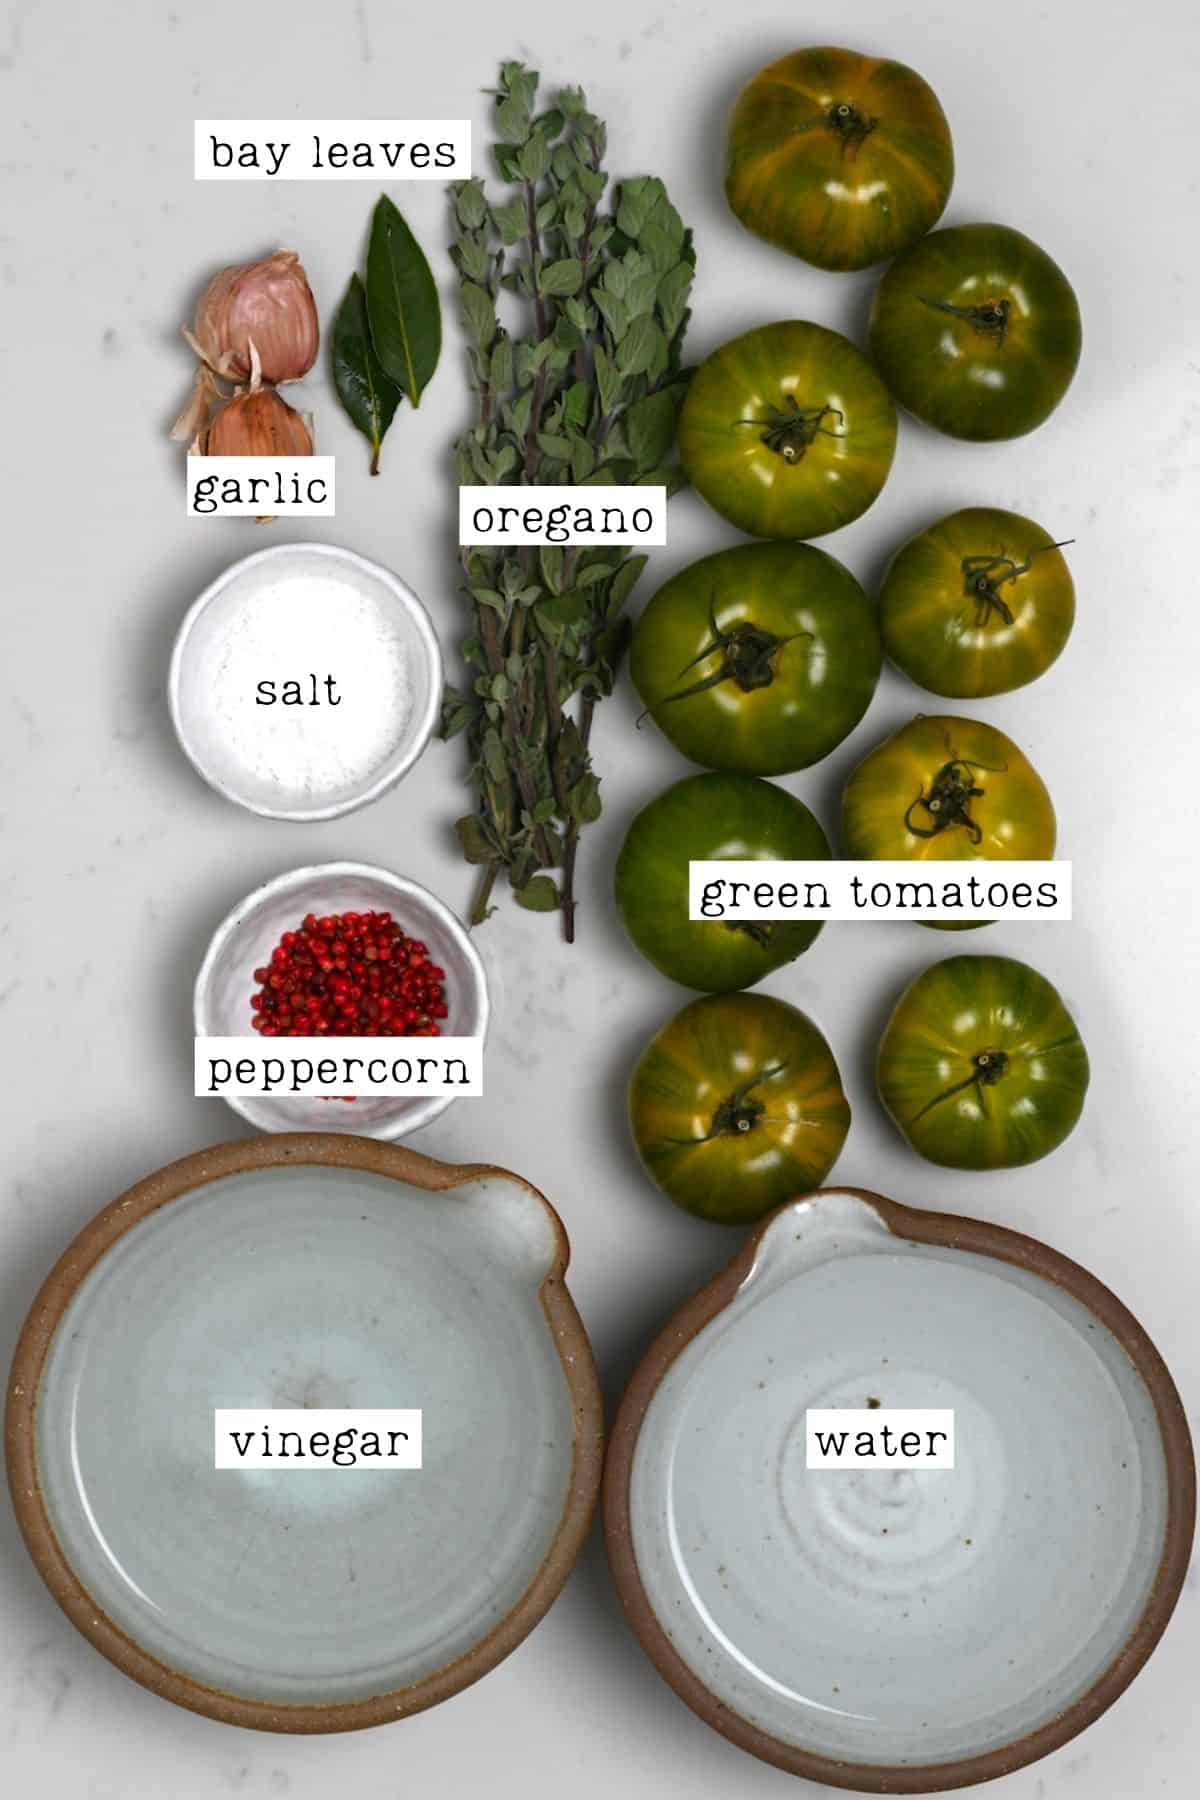 Ingredients for pickled green tomatoes